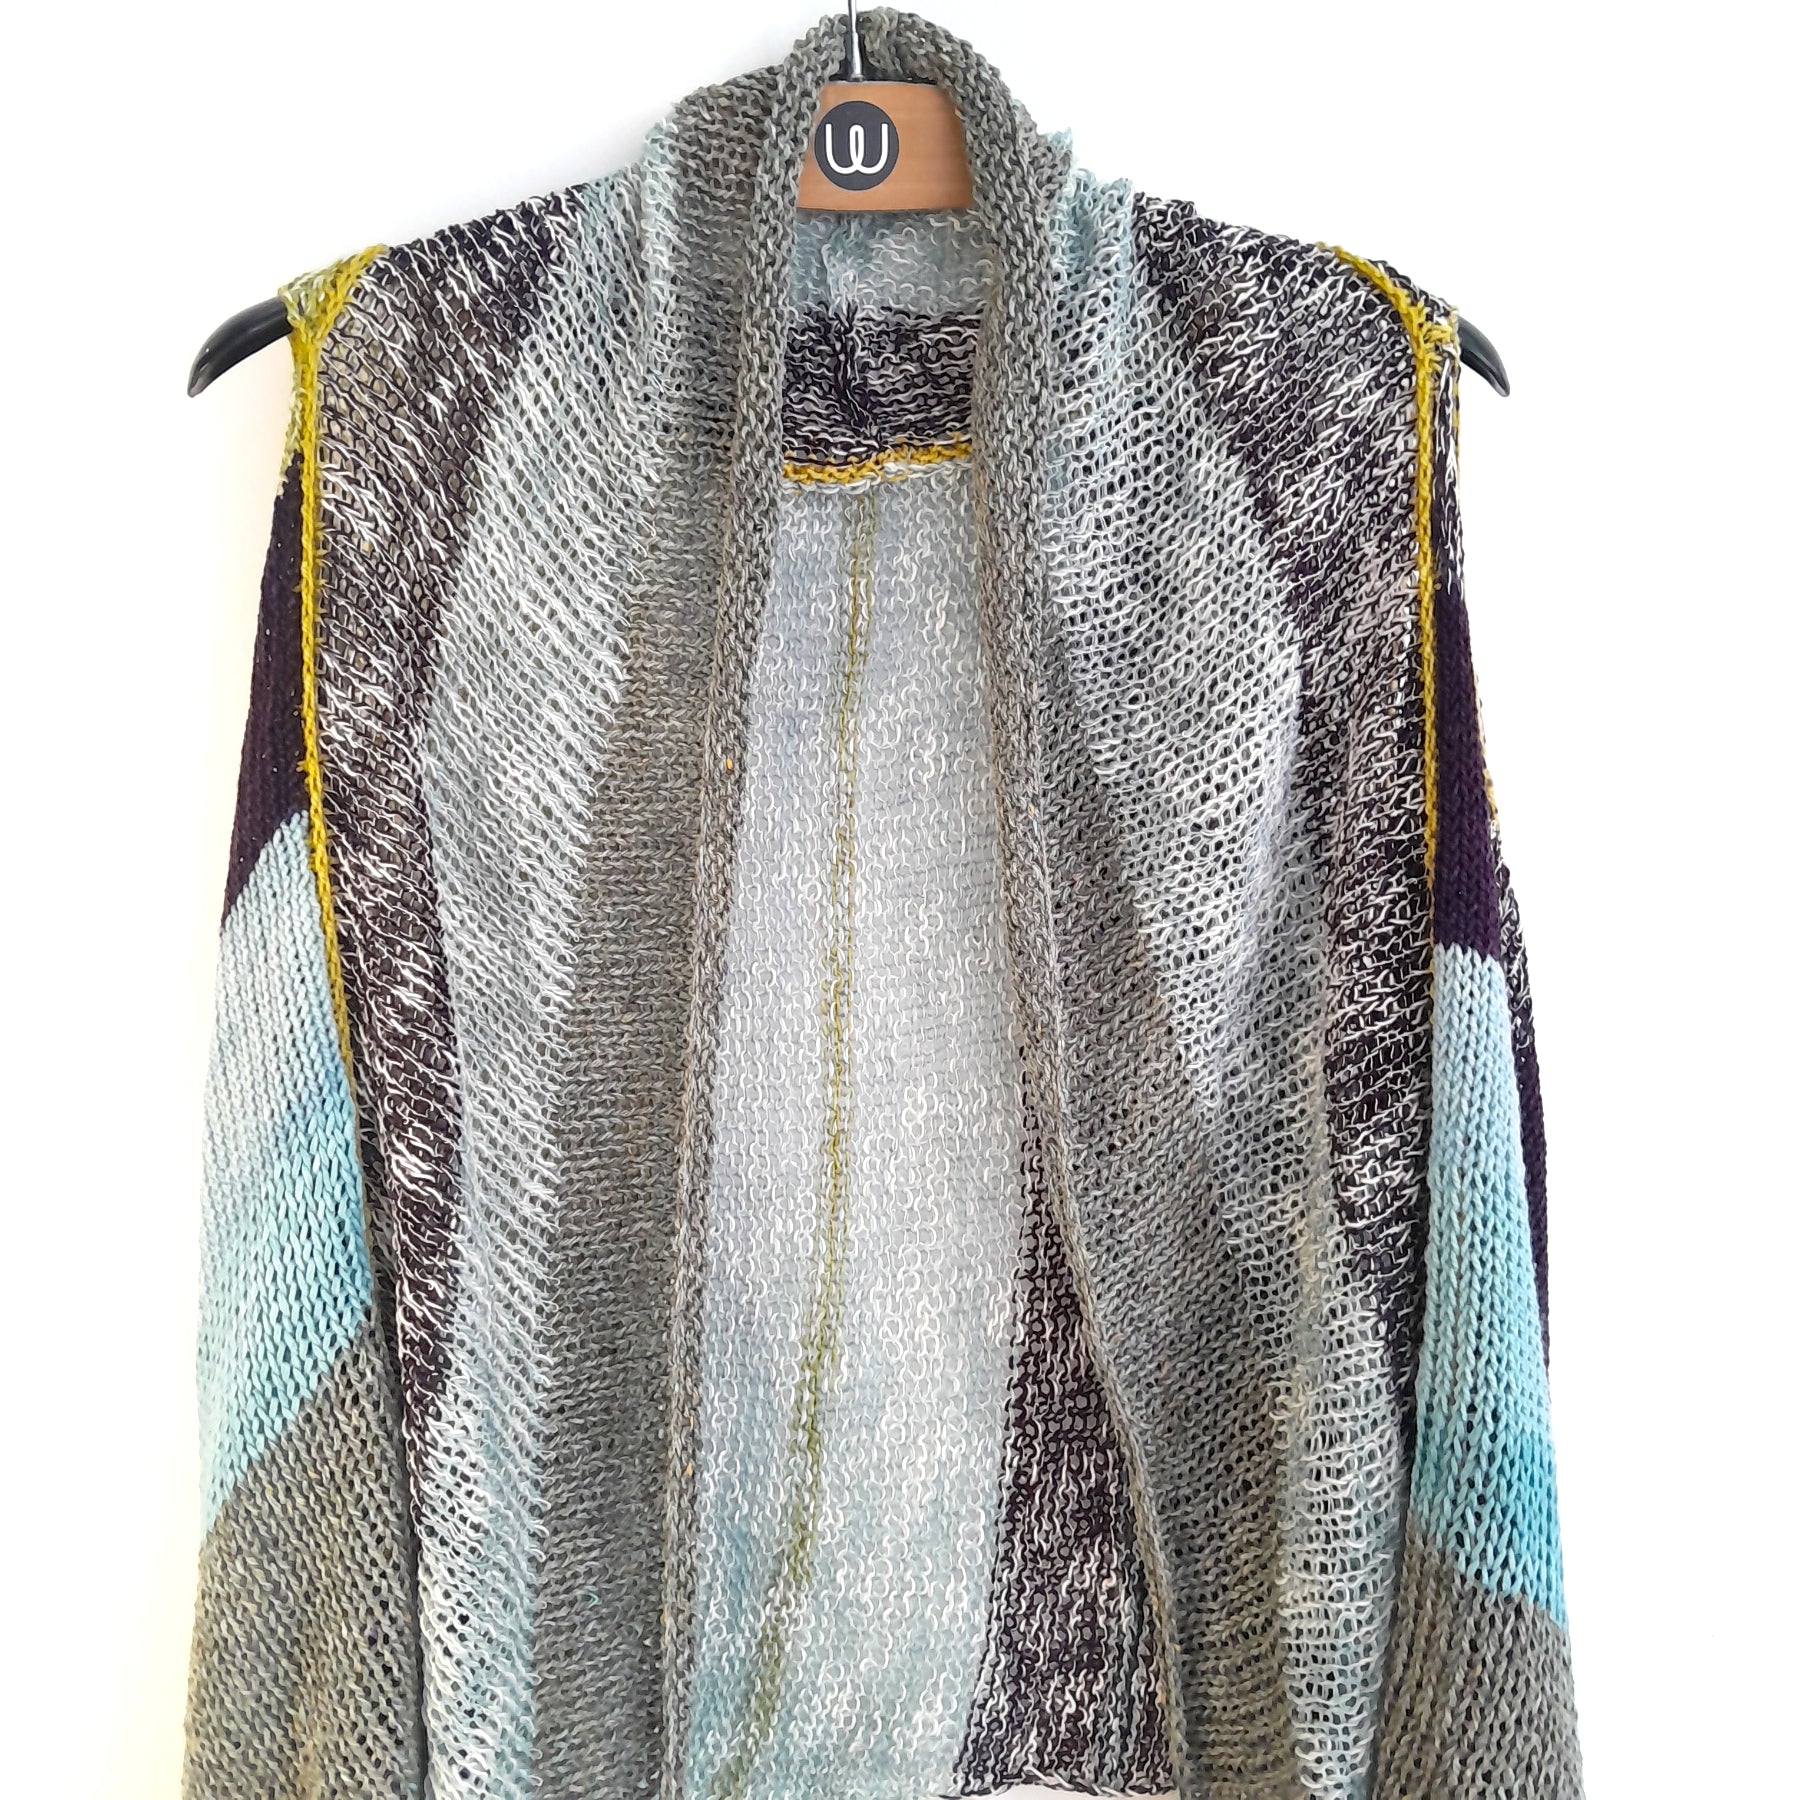 Convertible Gilet - Greens & Blues, Aubergine, Chartreuse